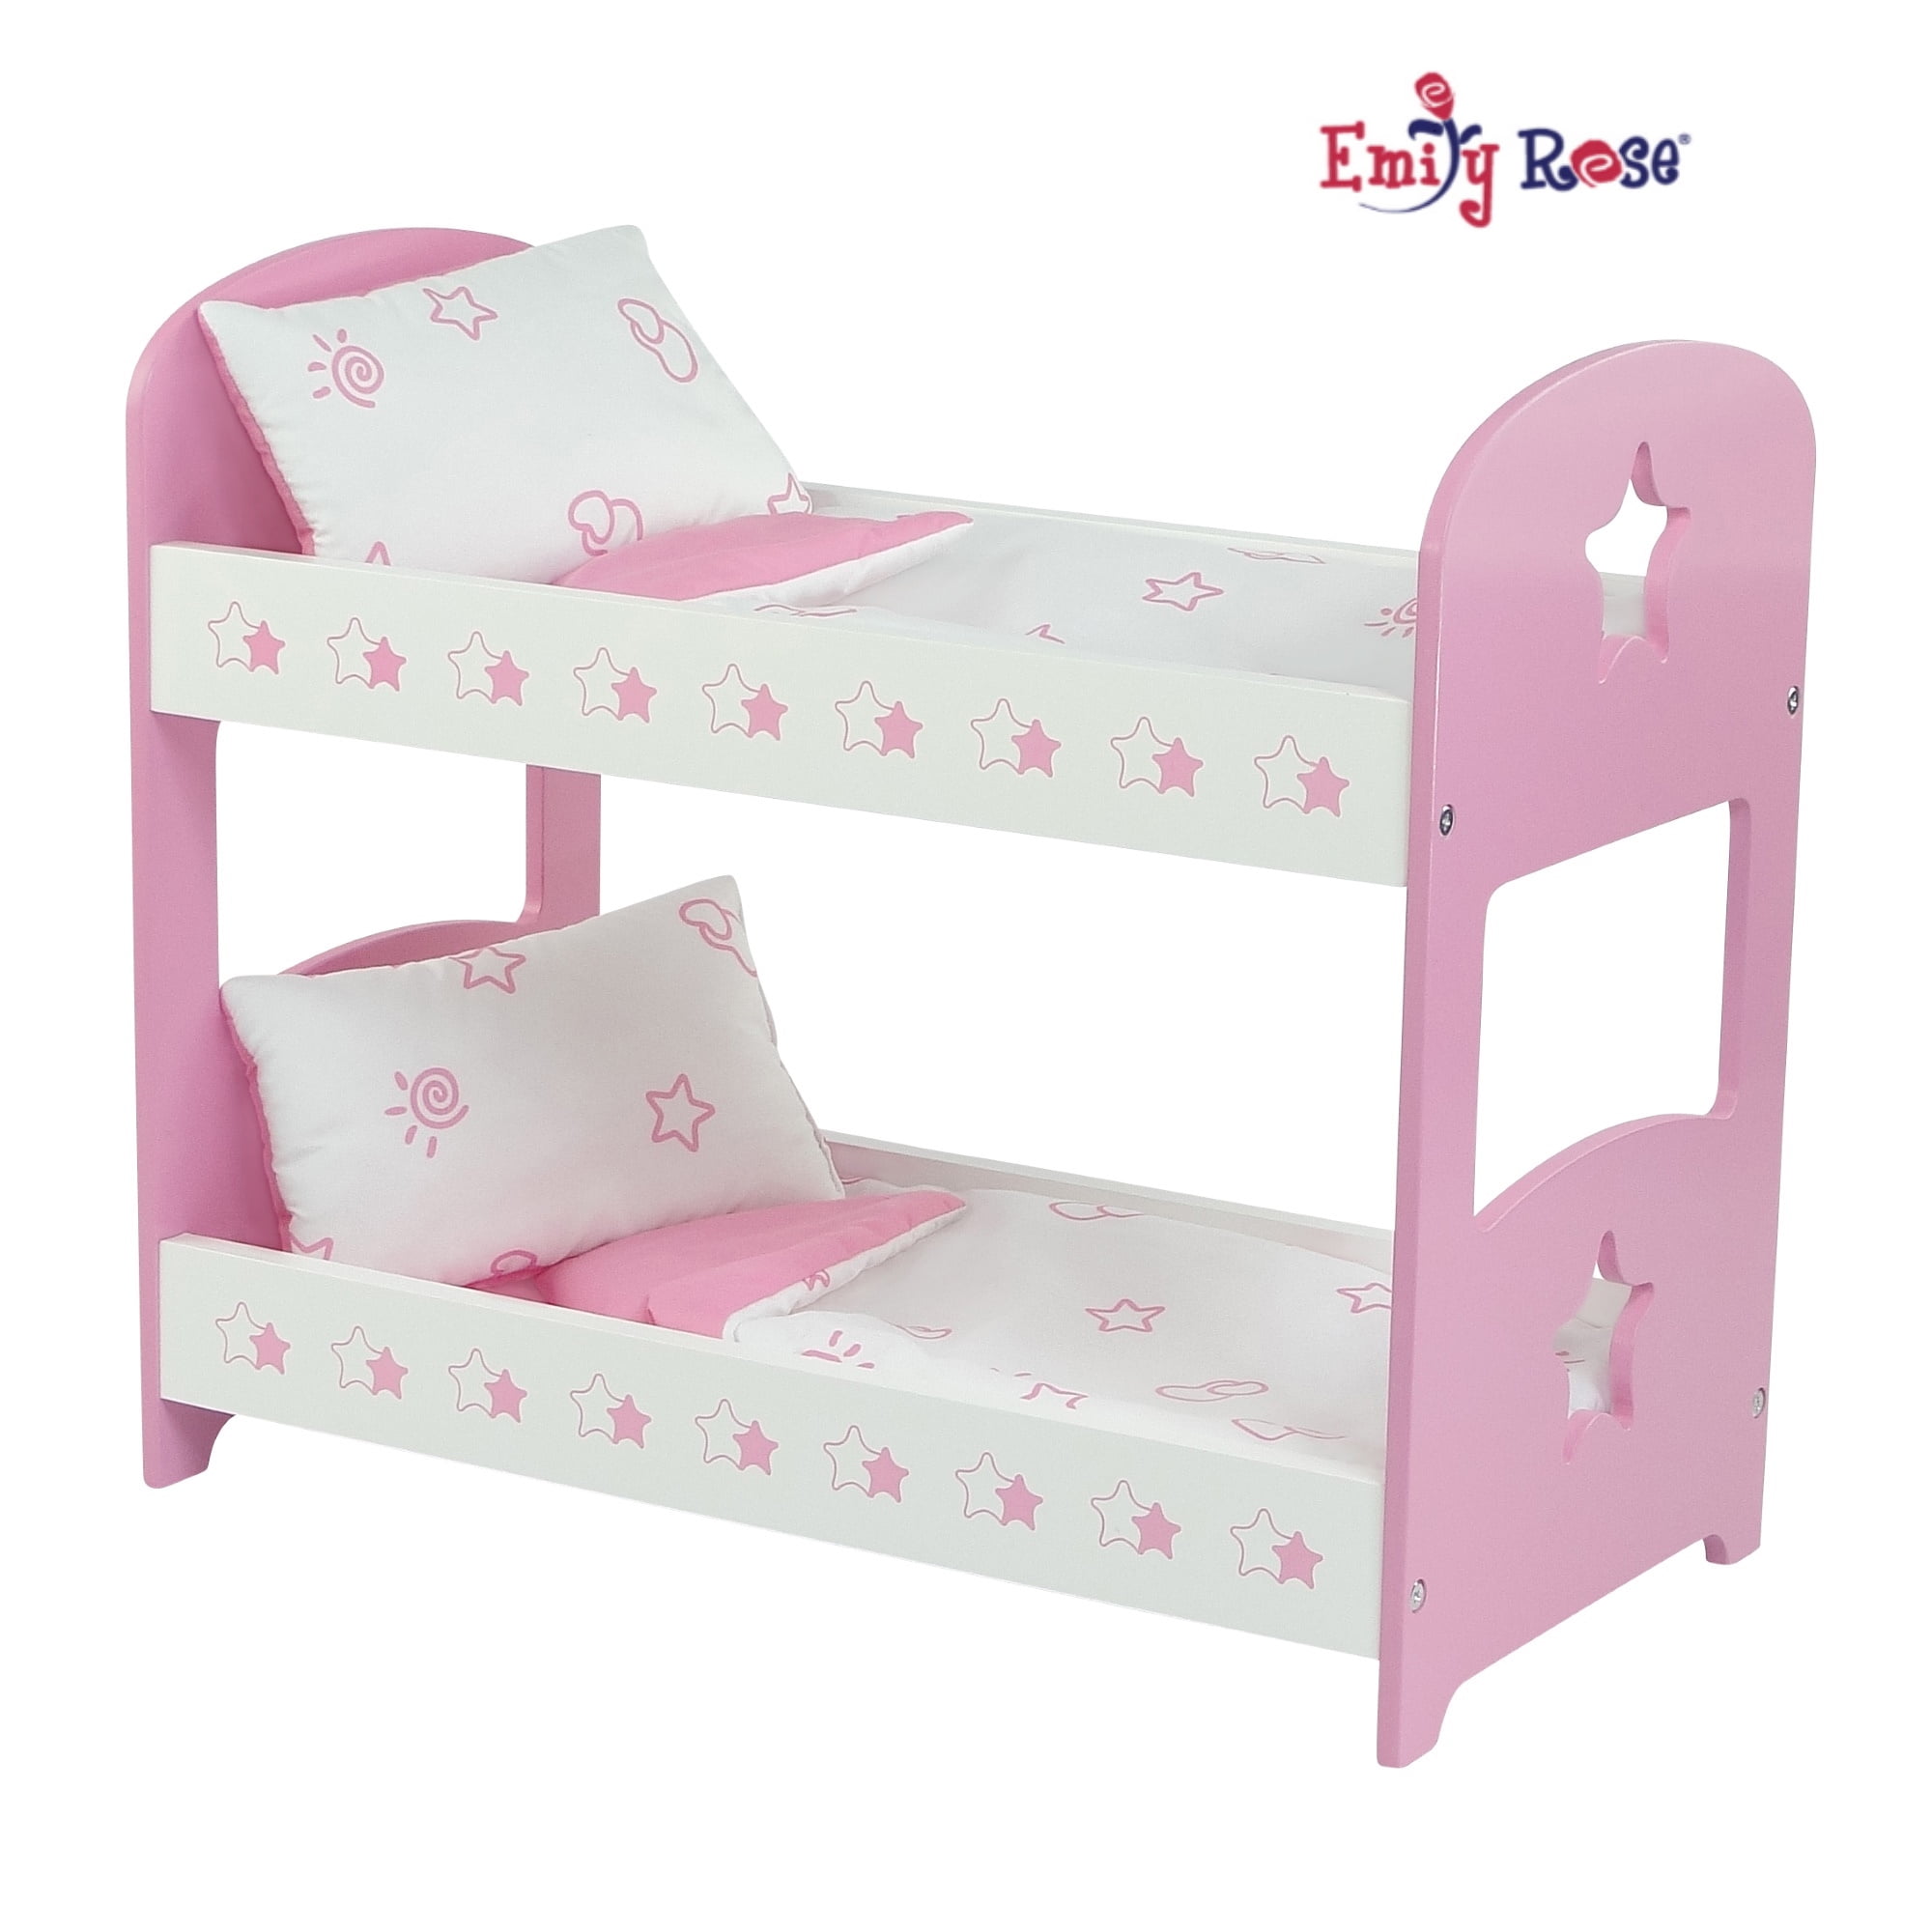 18 Inch Doll Bunk Bed Furniture, Antique Wooden Doll Bunk Beds